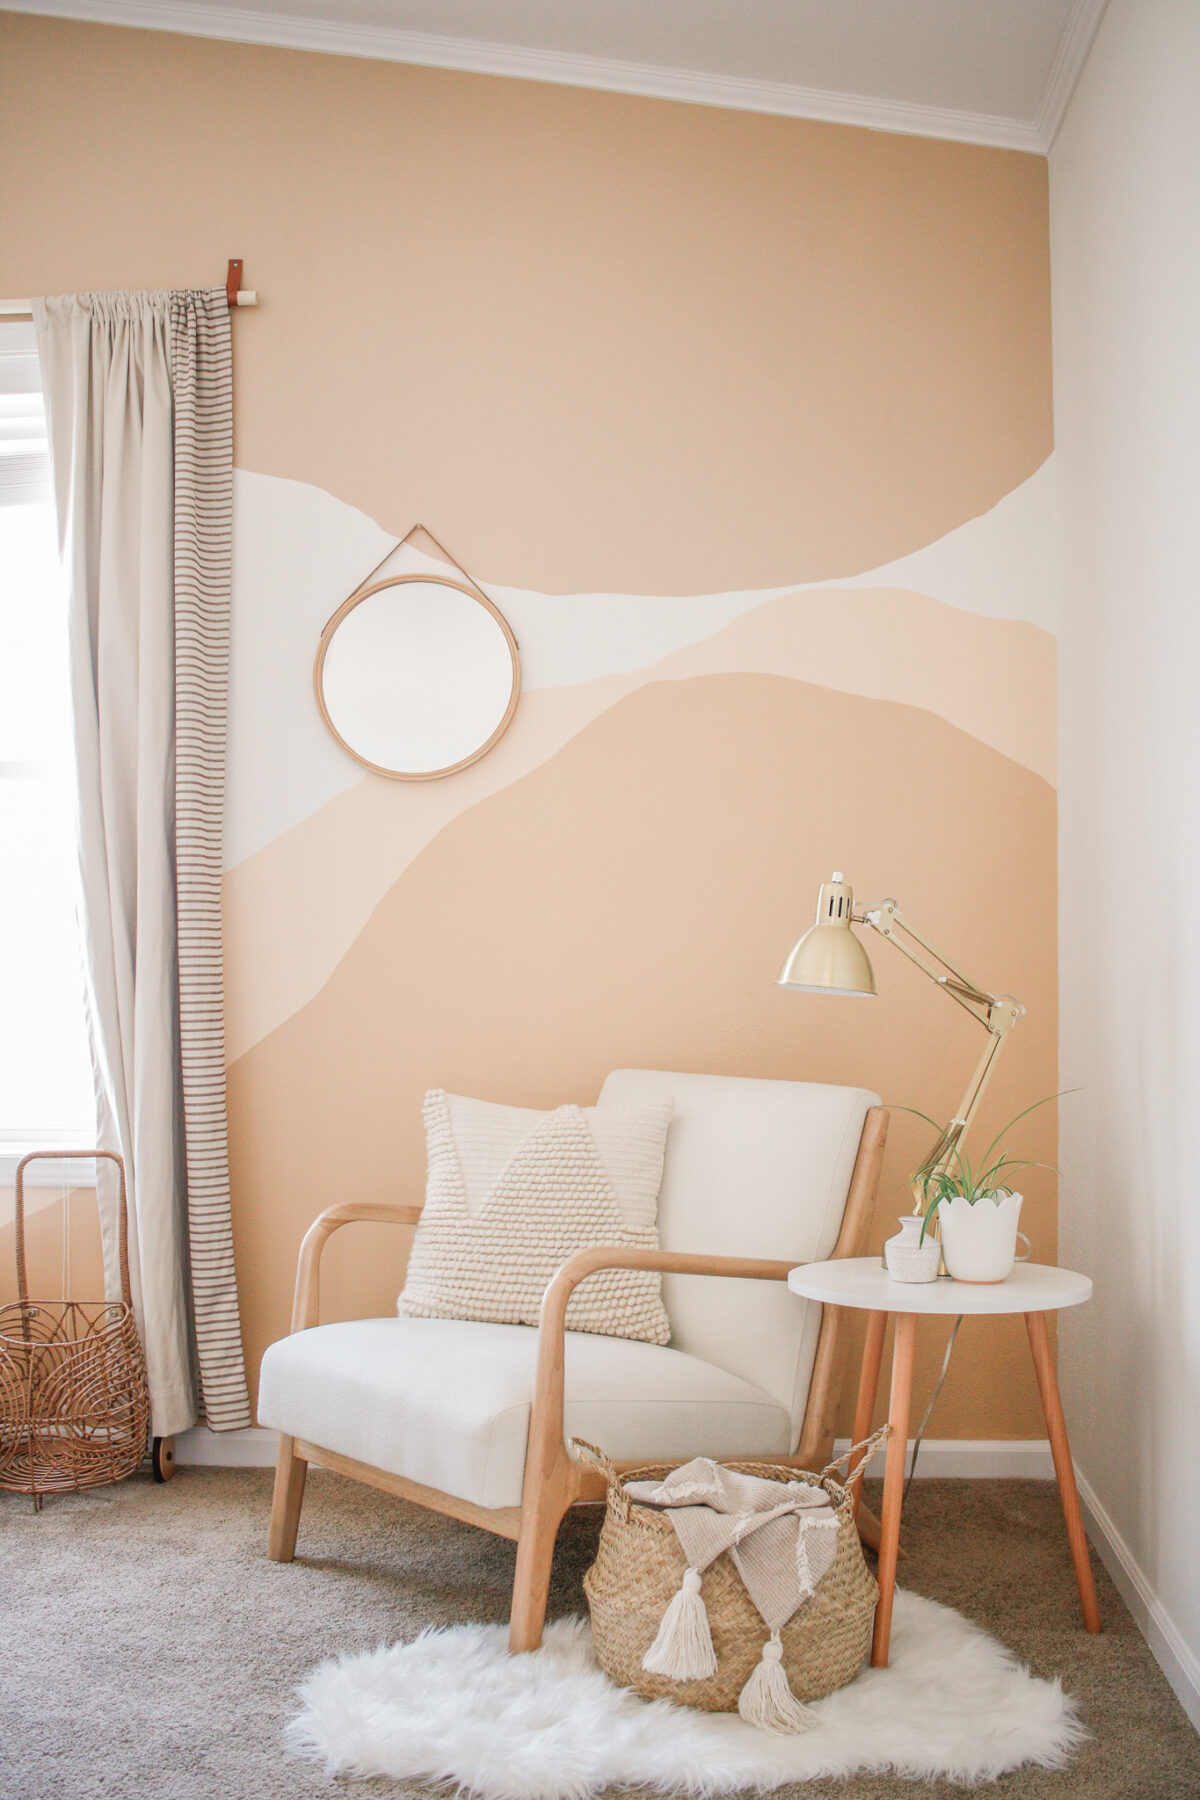 DIY Painted Accent Wall Mural